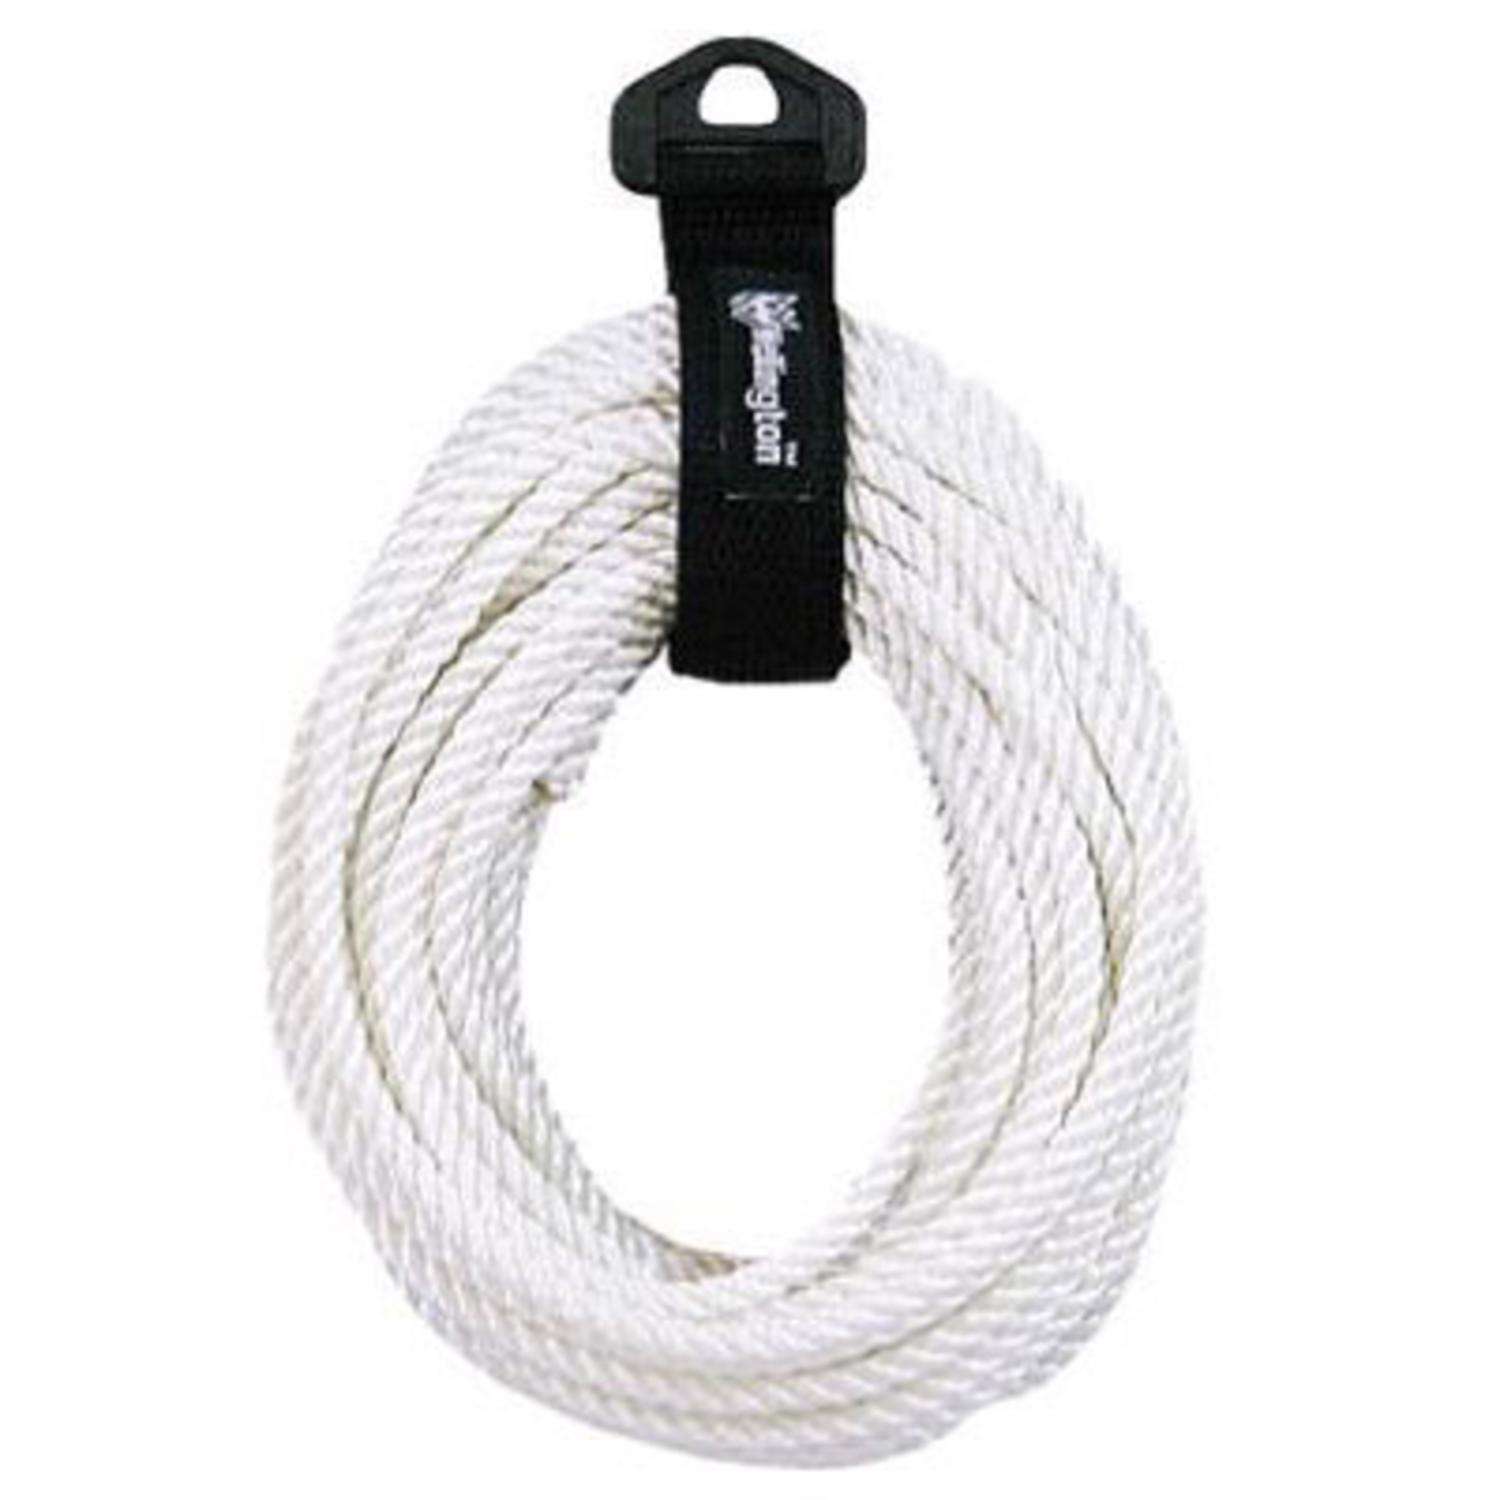 Ace 1/4 in. D X 100 ft. L White Twisted Nylon Rope - Ace Hardware